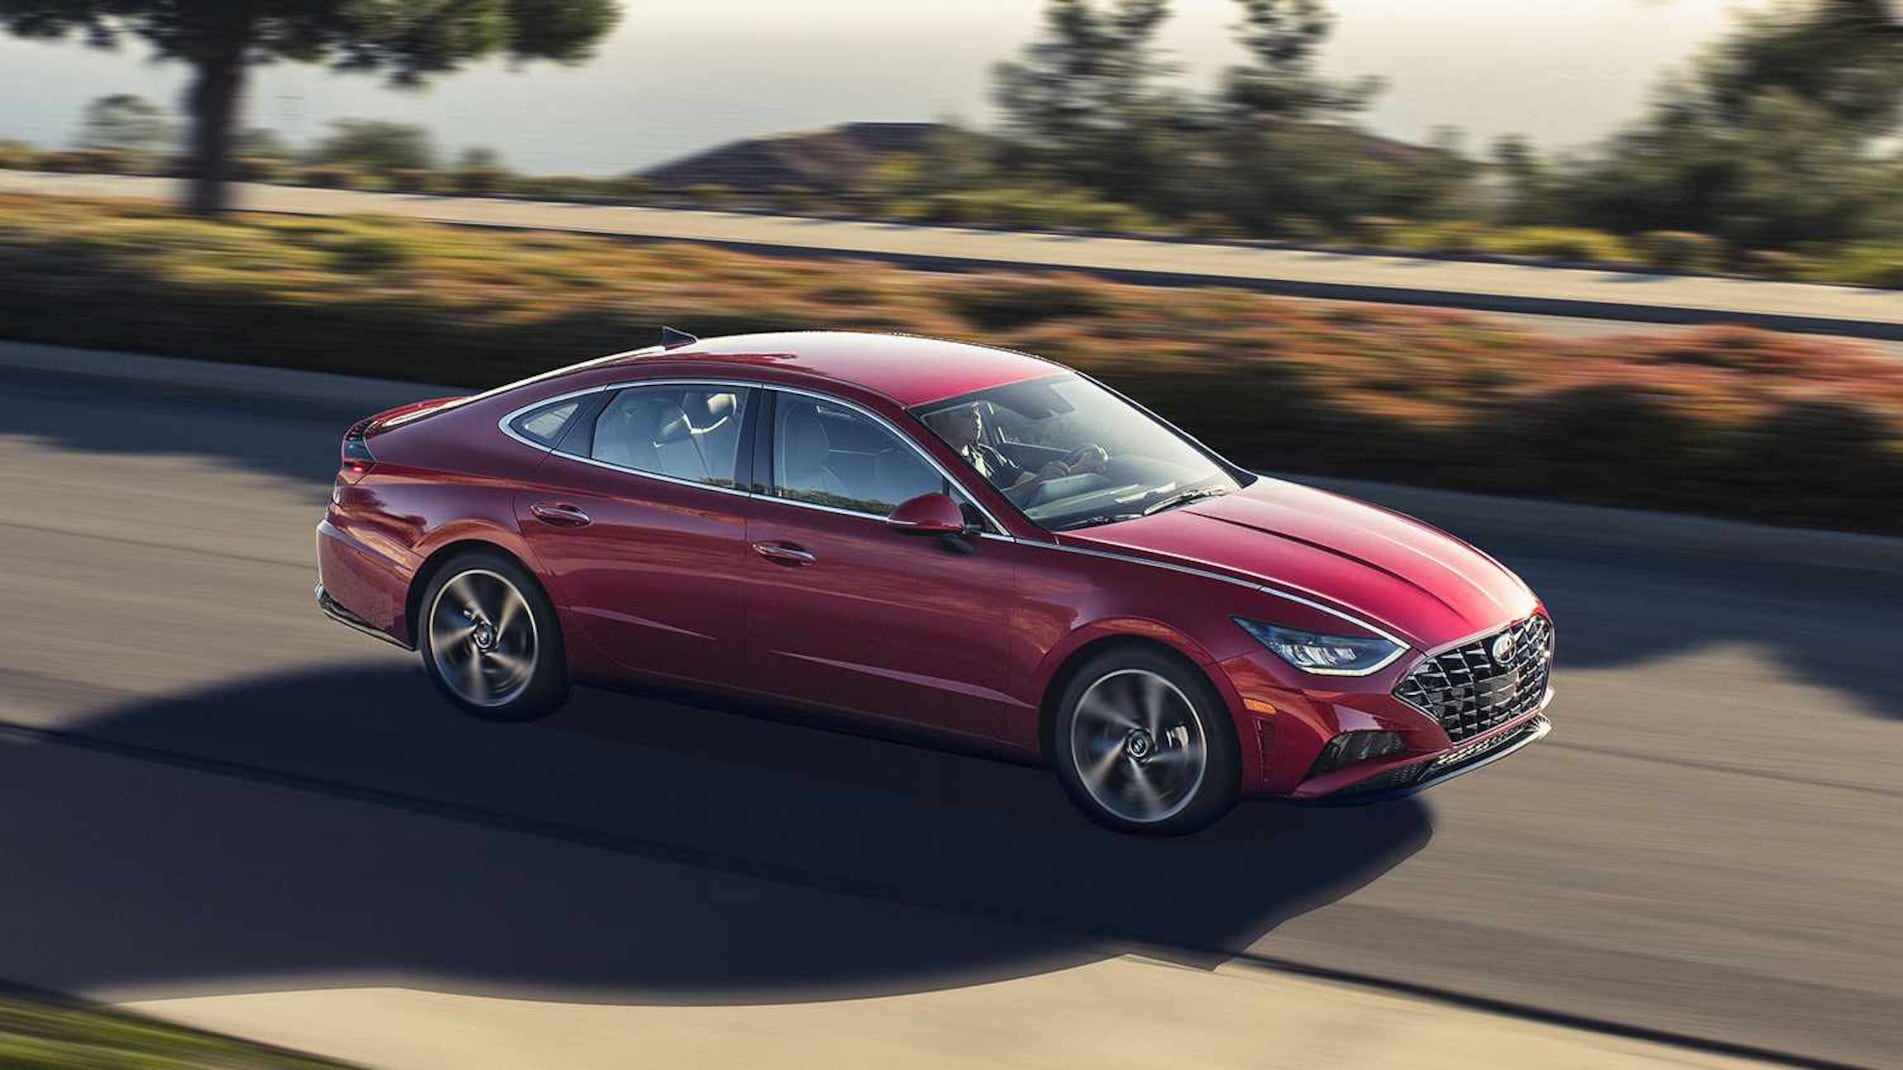 Hyundai today introduced its all-new 2020 Sonata at the New York International Auto Show, marking the North American debut of Hyundai’s longest-standing and most successful model.